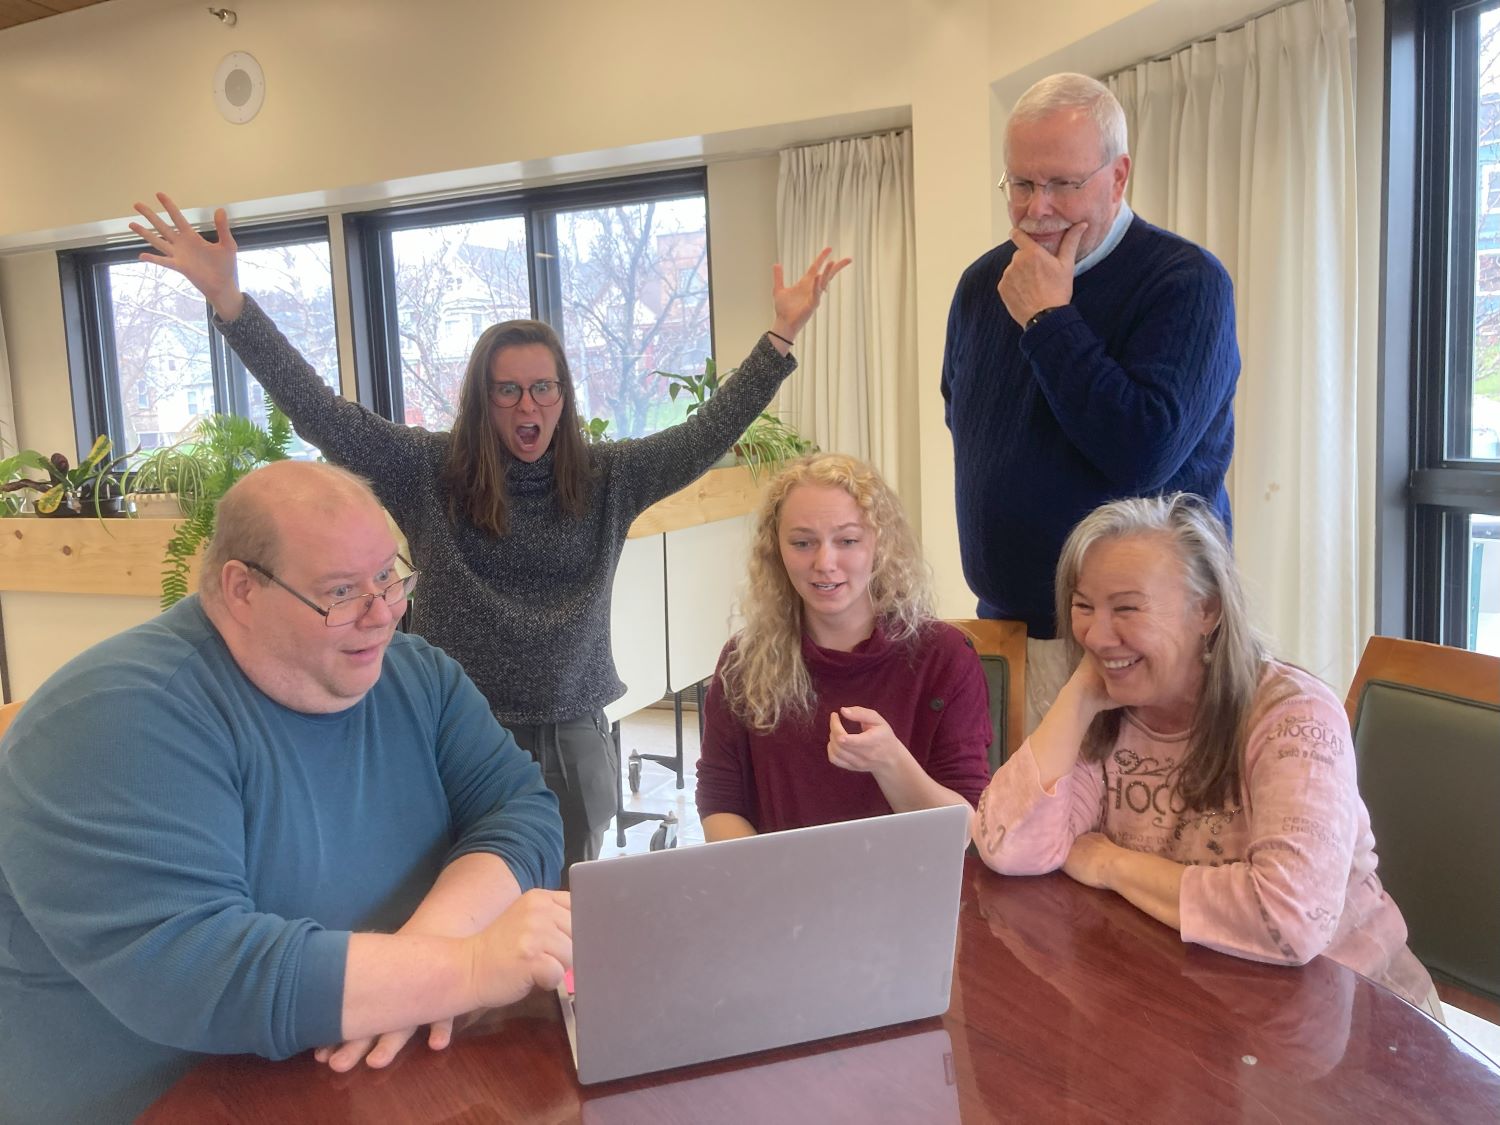 Five people gathered around a laptop show joy and surprise in this silly photo.